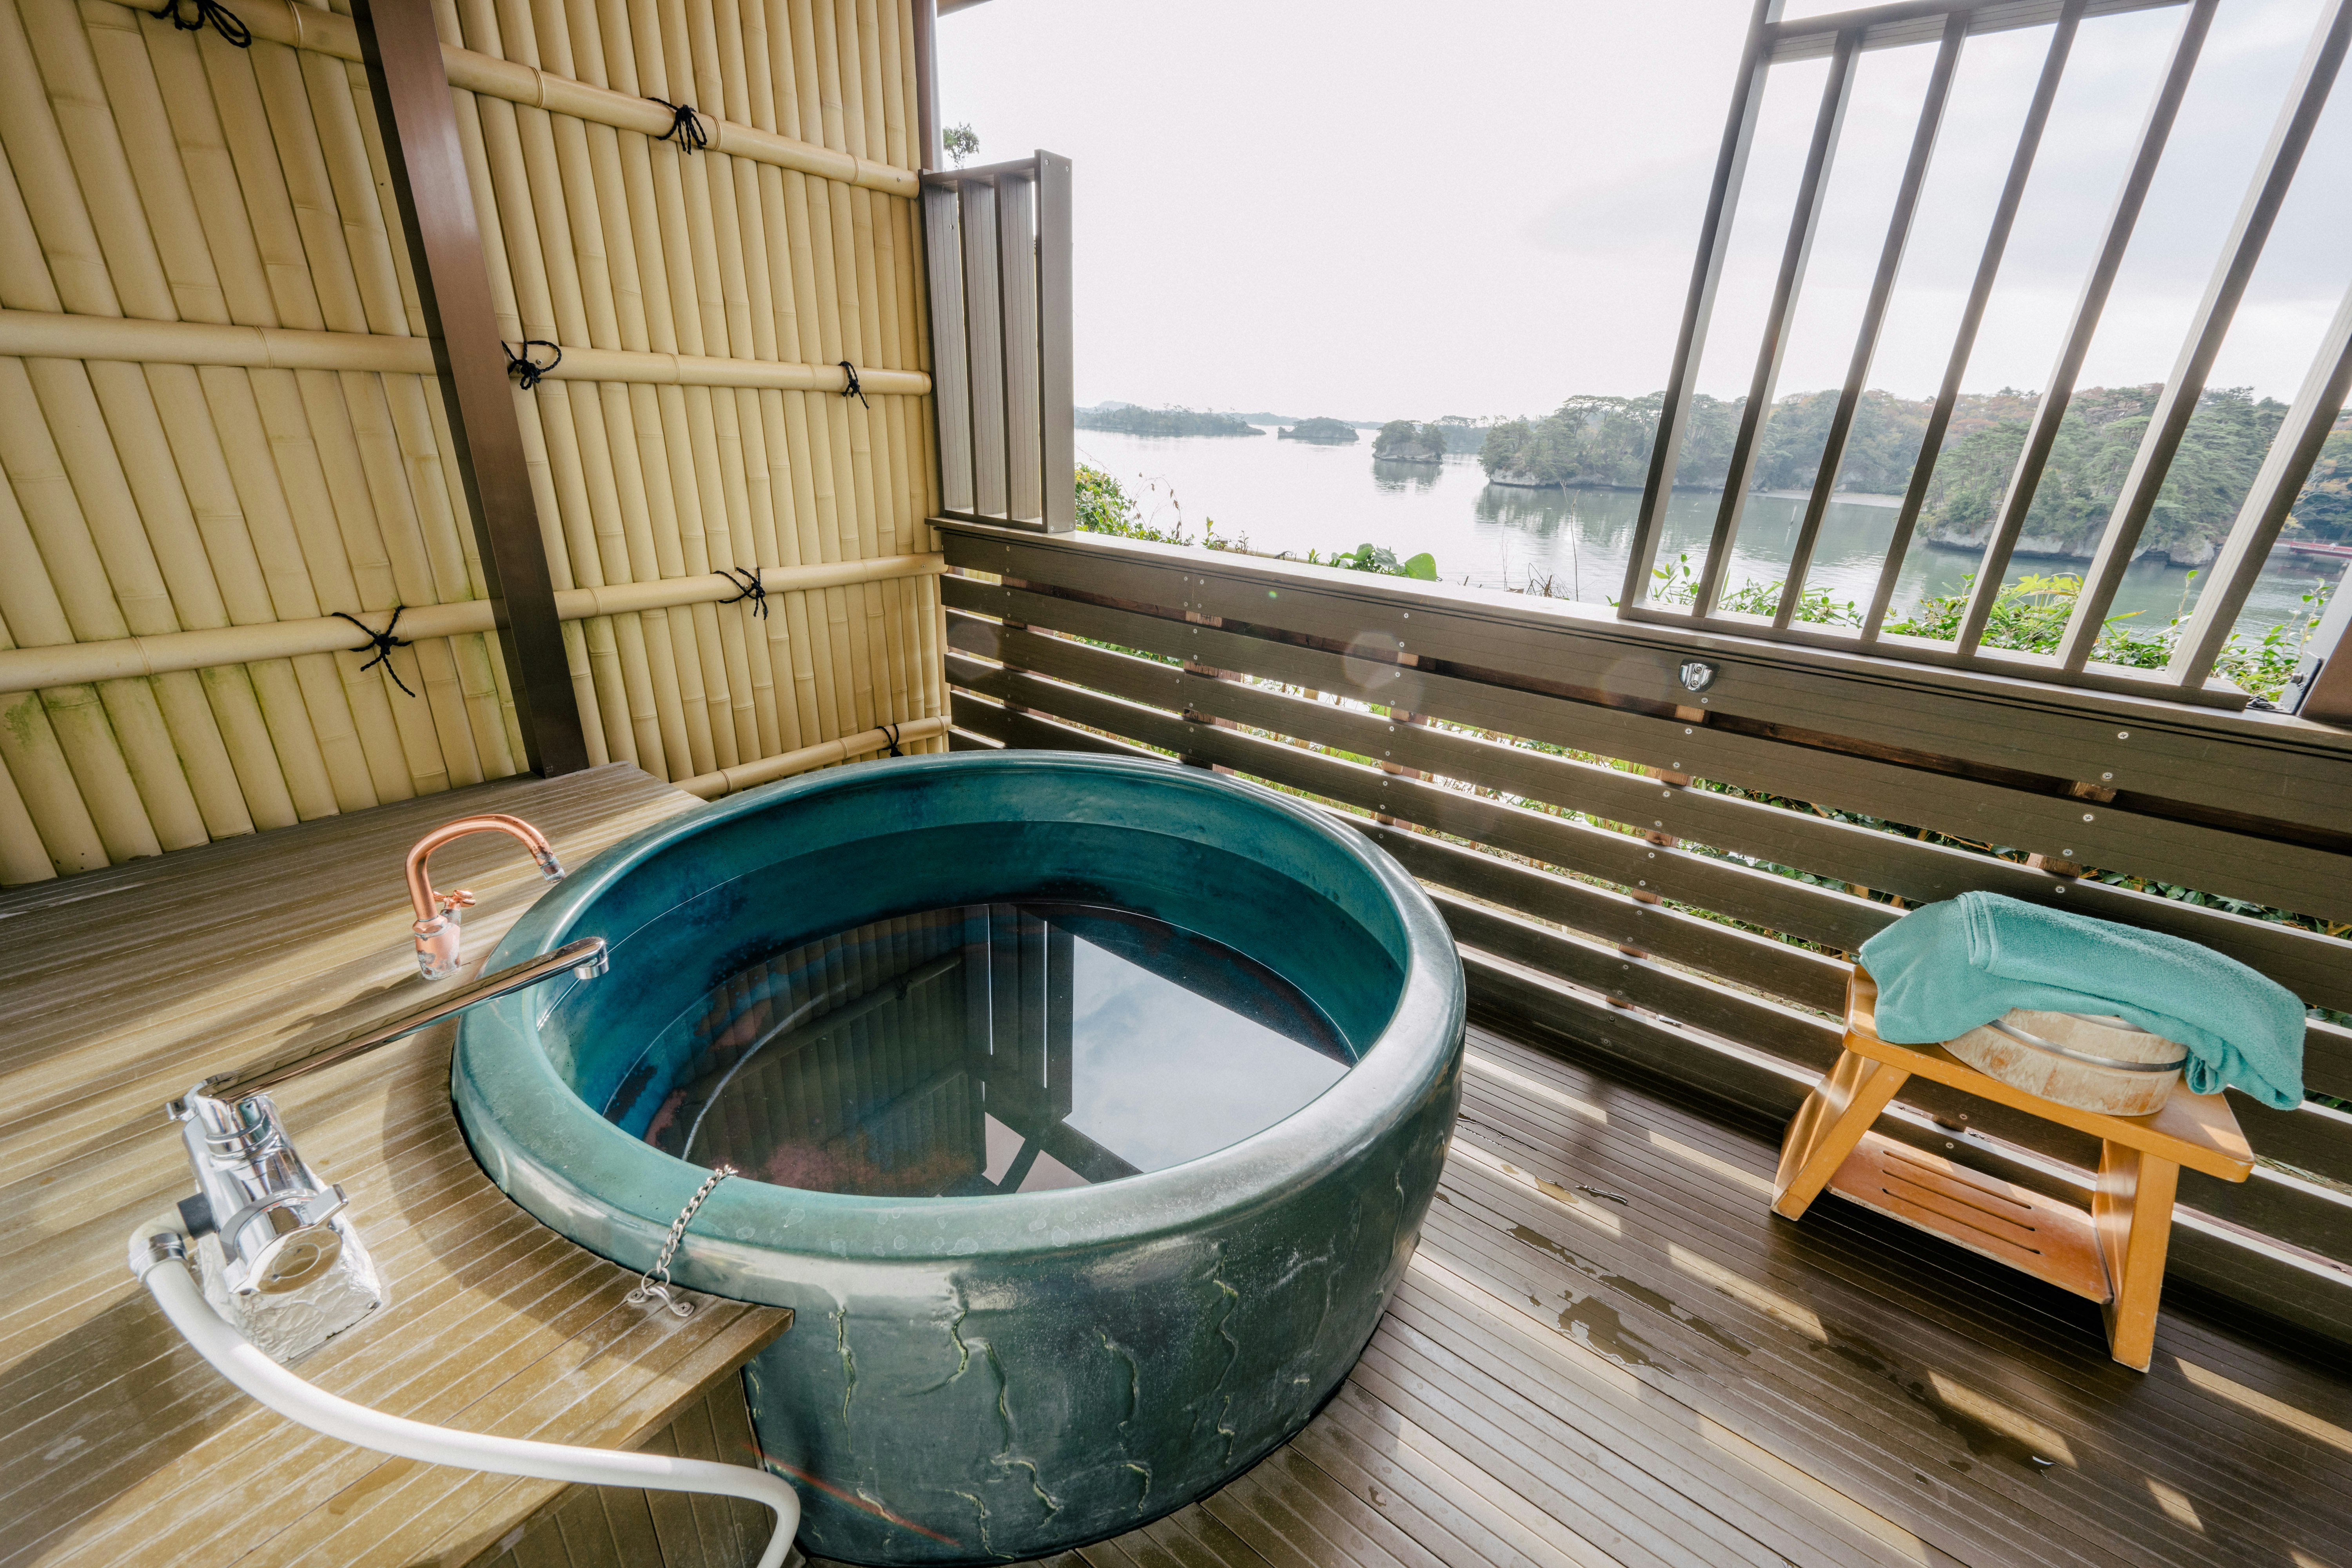 A blue onsen bath on a wooden balcony with views of nature beyond